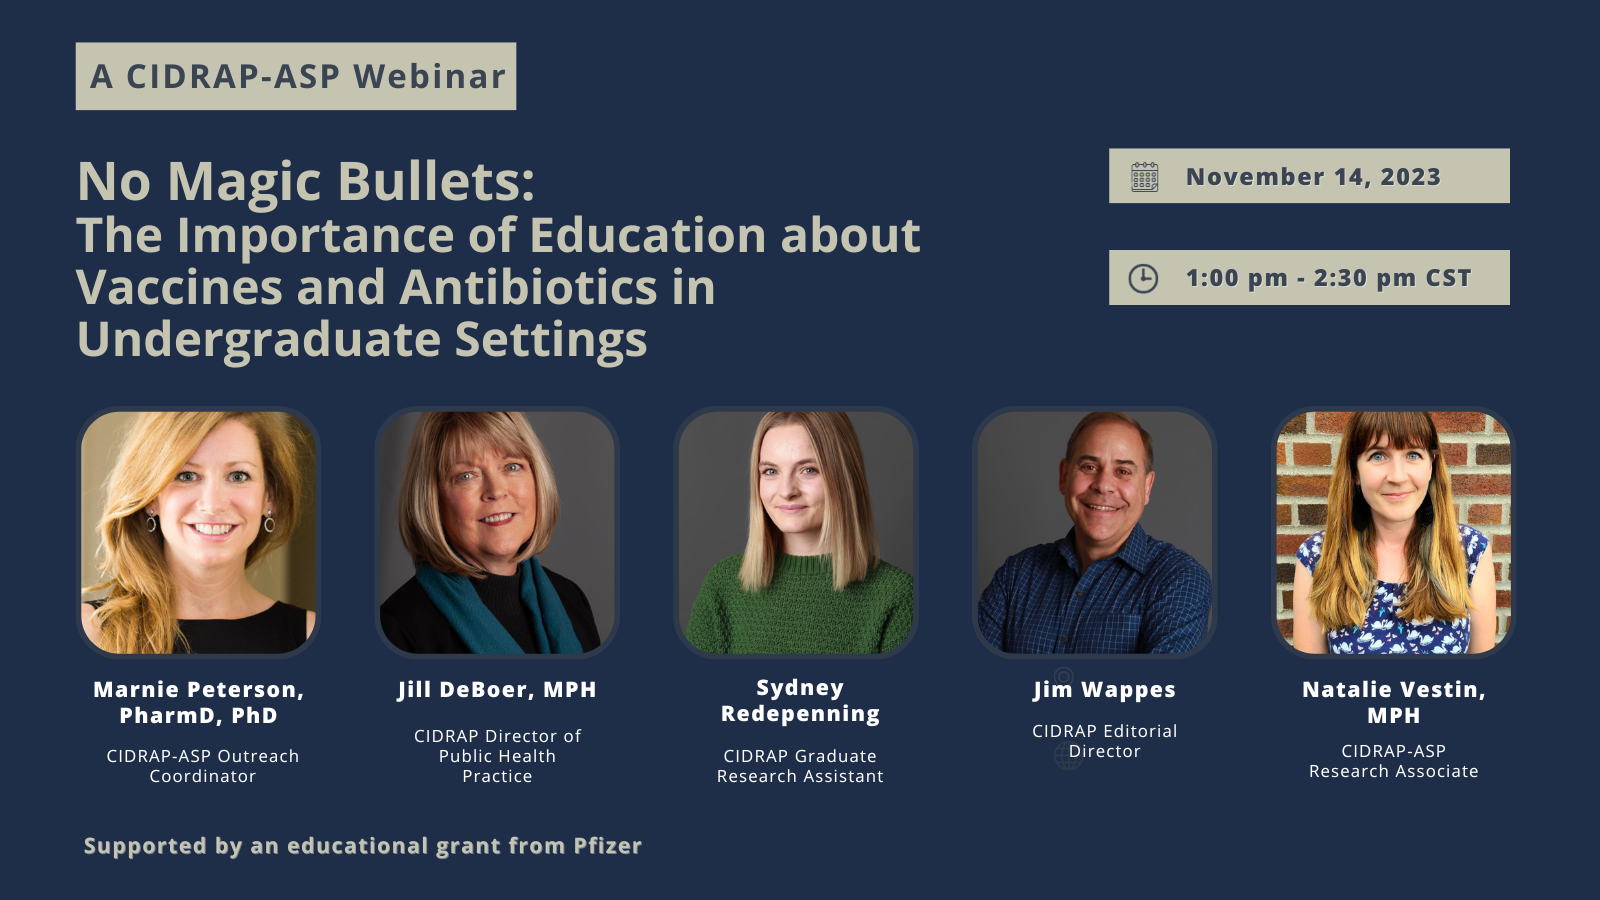 Webinar promo image with photos and credentials of speakers.